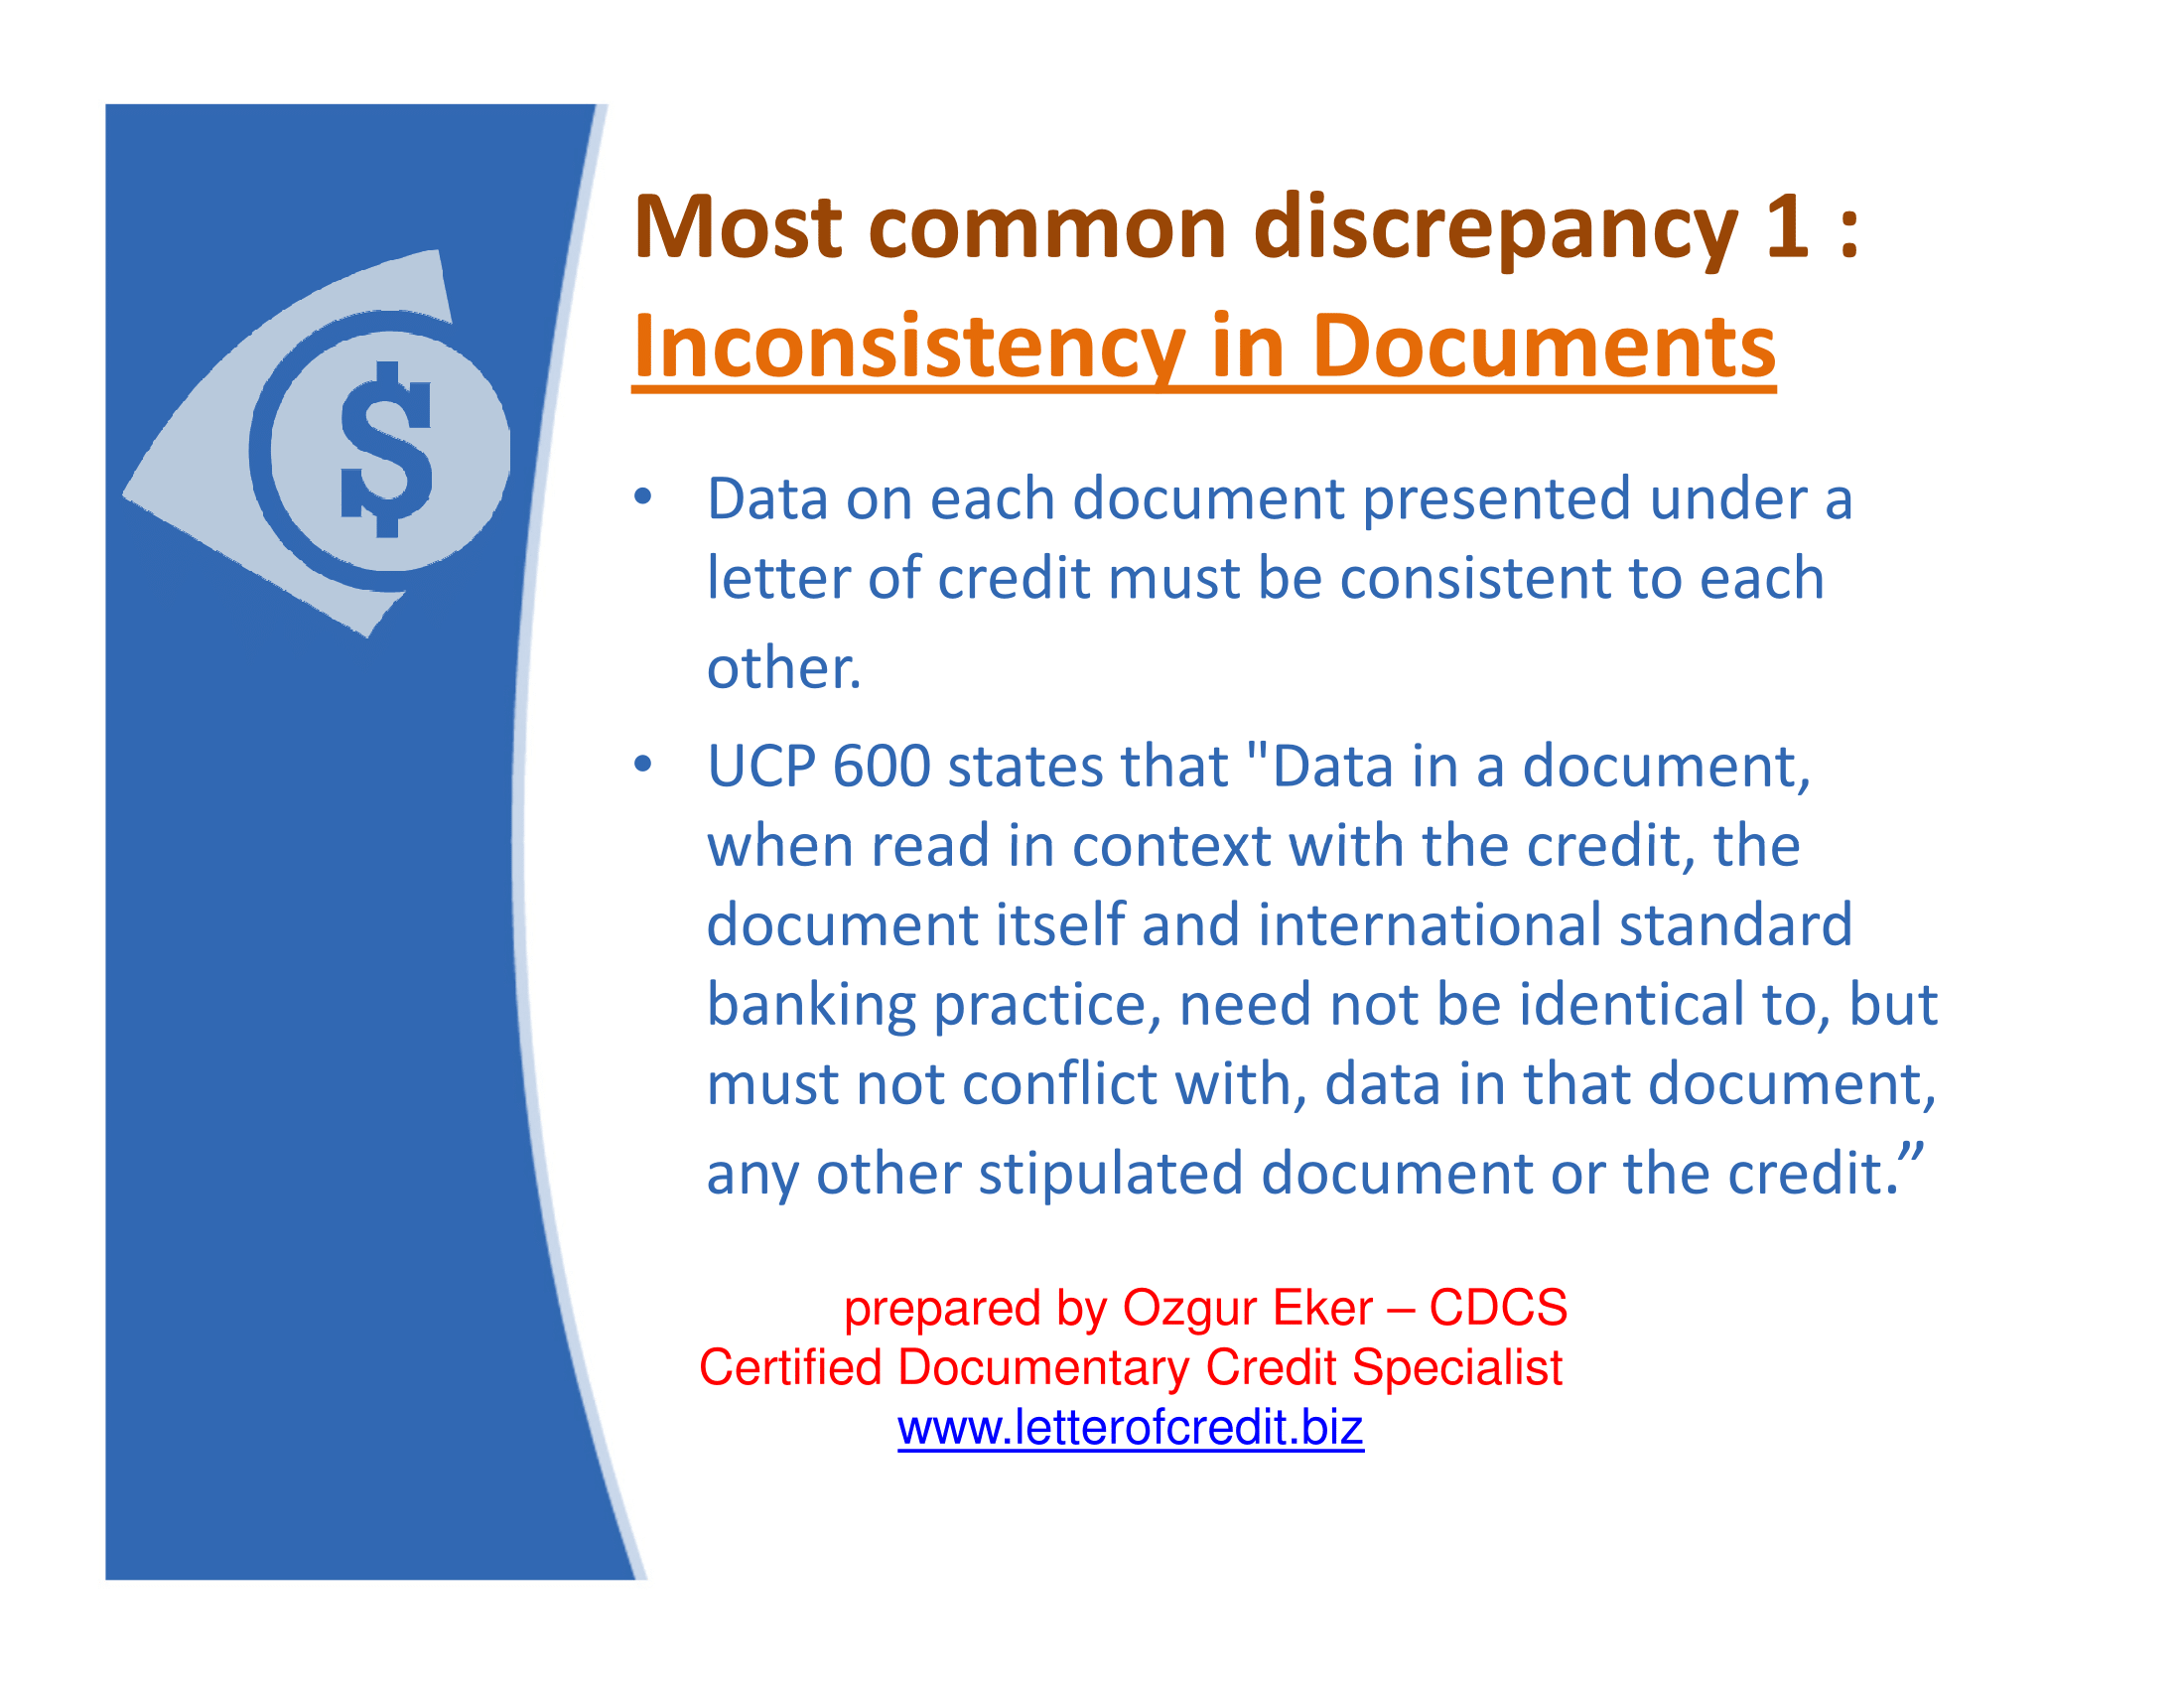 Data on each document presented under a letter of credit must be consistent to each other. UCP 600 states that "Data in a document, when read in context with the credit, the document itself and international standard banking practice, need not be identical to, but must not conflict with, data in that document, any other stipulated document or the credit.”